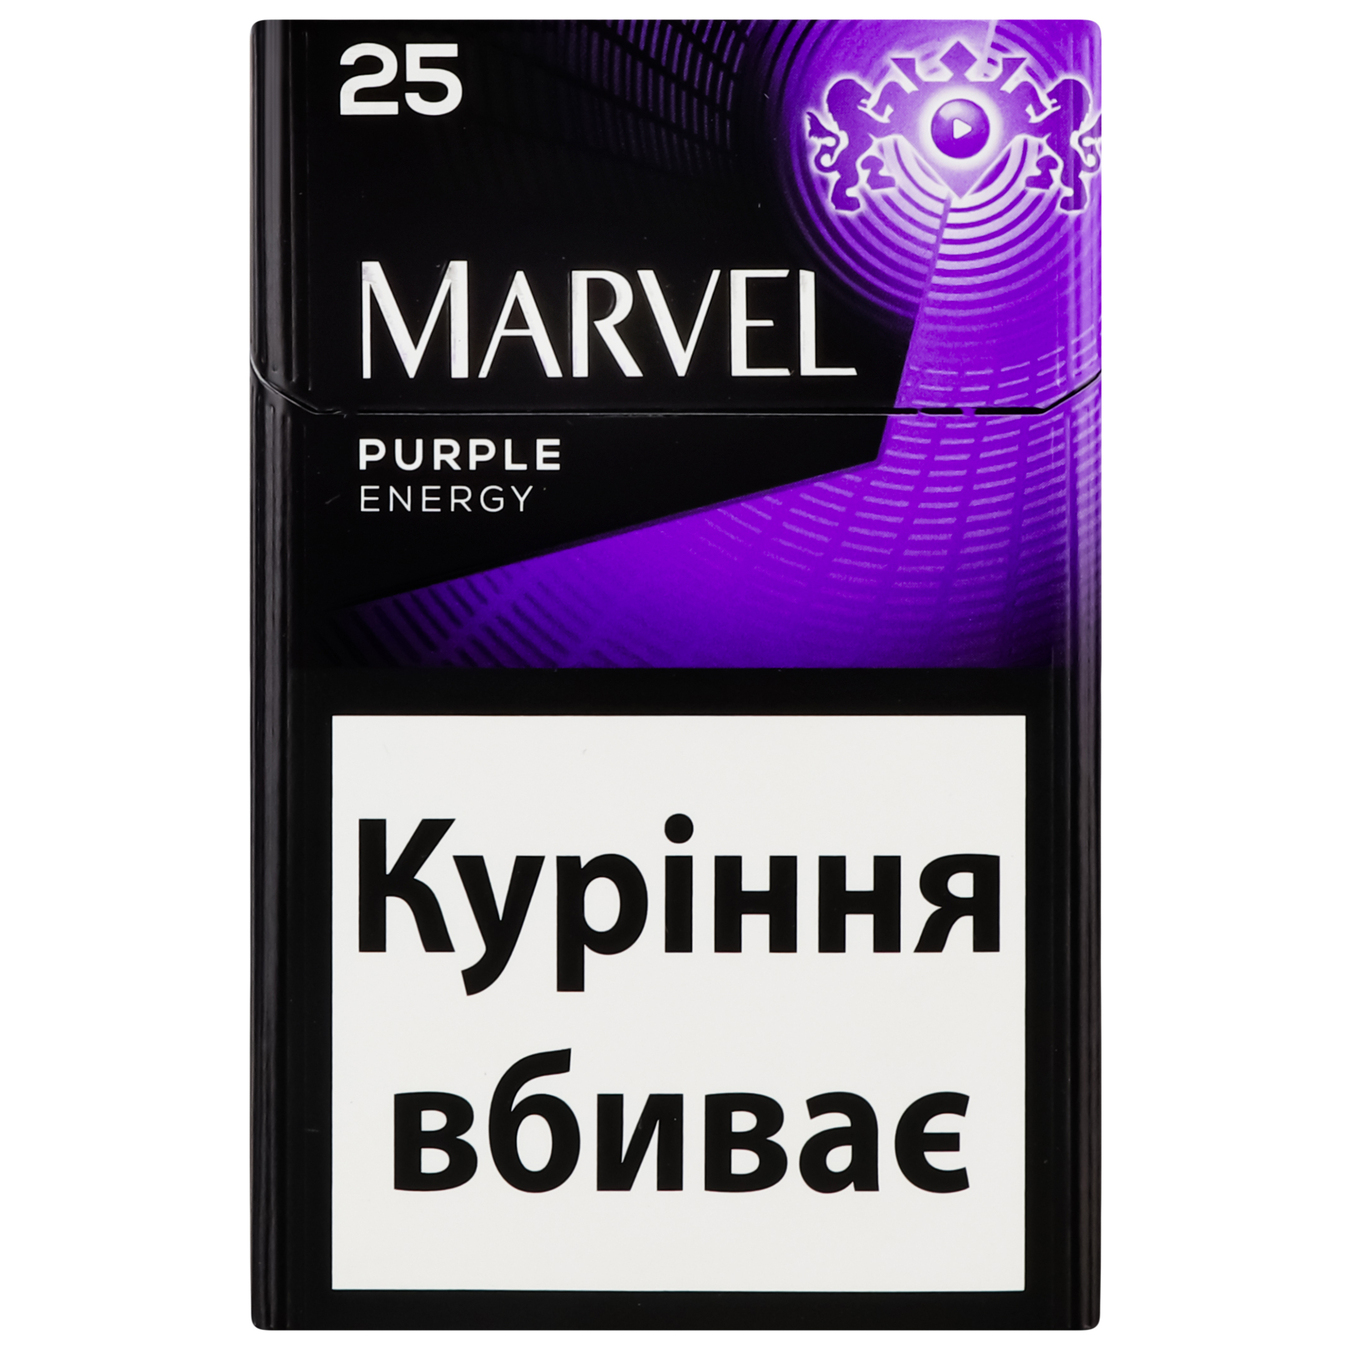 Marvel Purple Energy cigarettes 25pcs (the price is without excise tax)